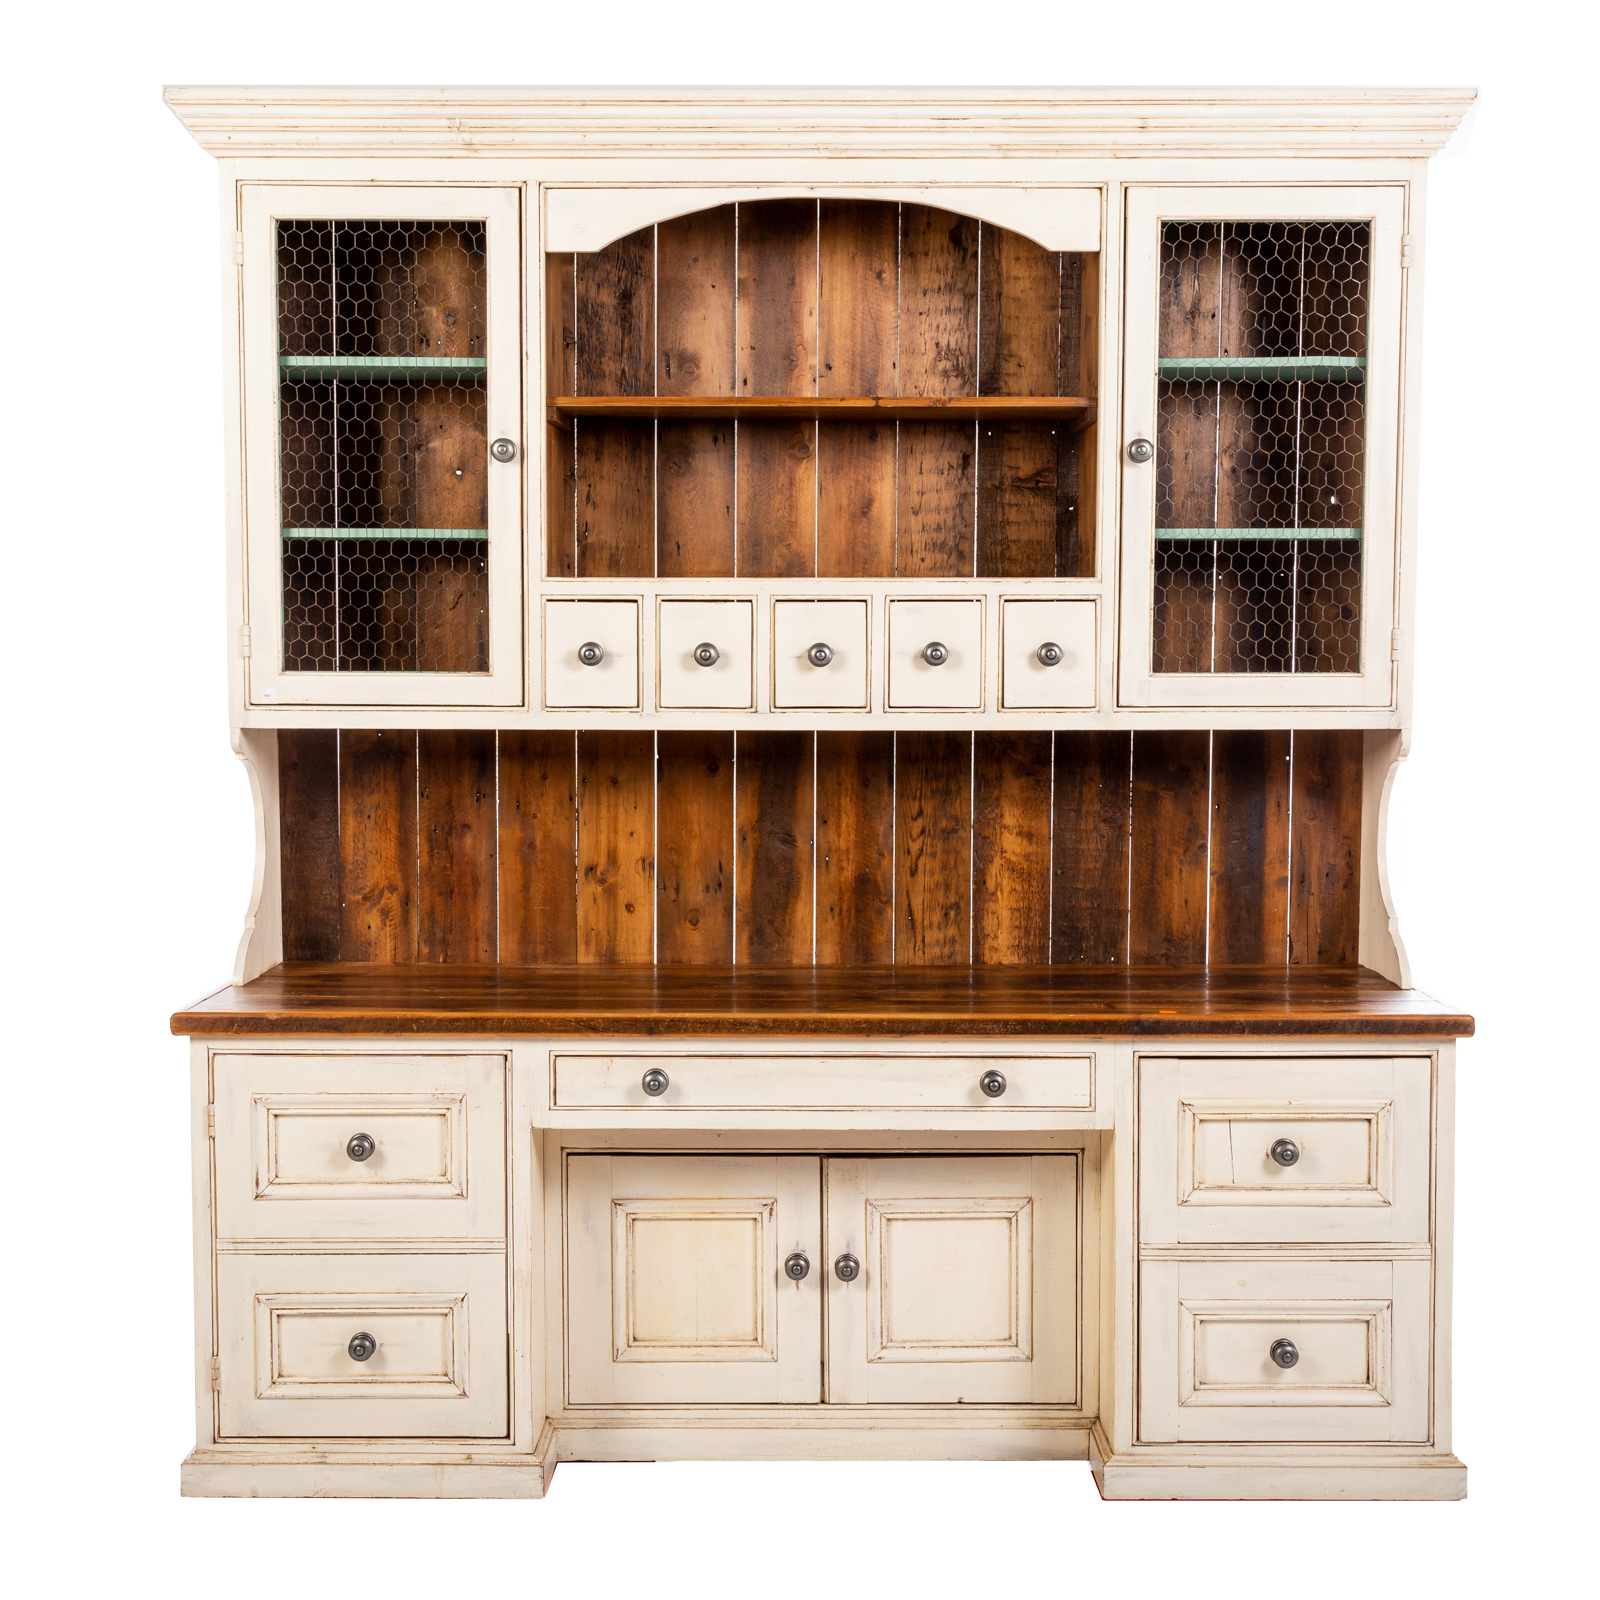 GAINS MCHALE PINE COUNTRY CUPBOARD